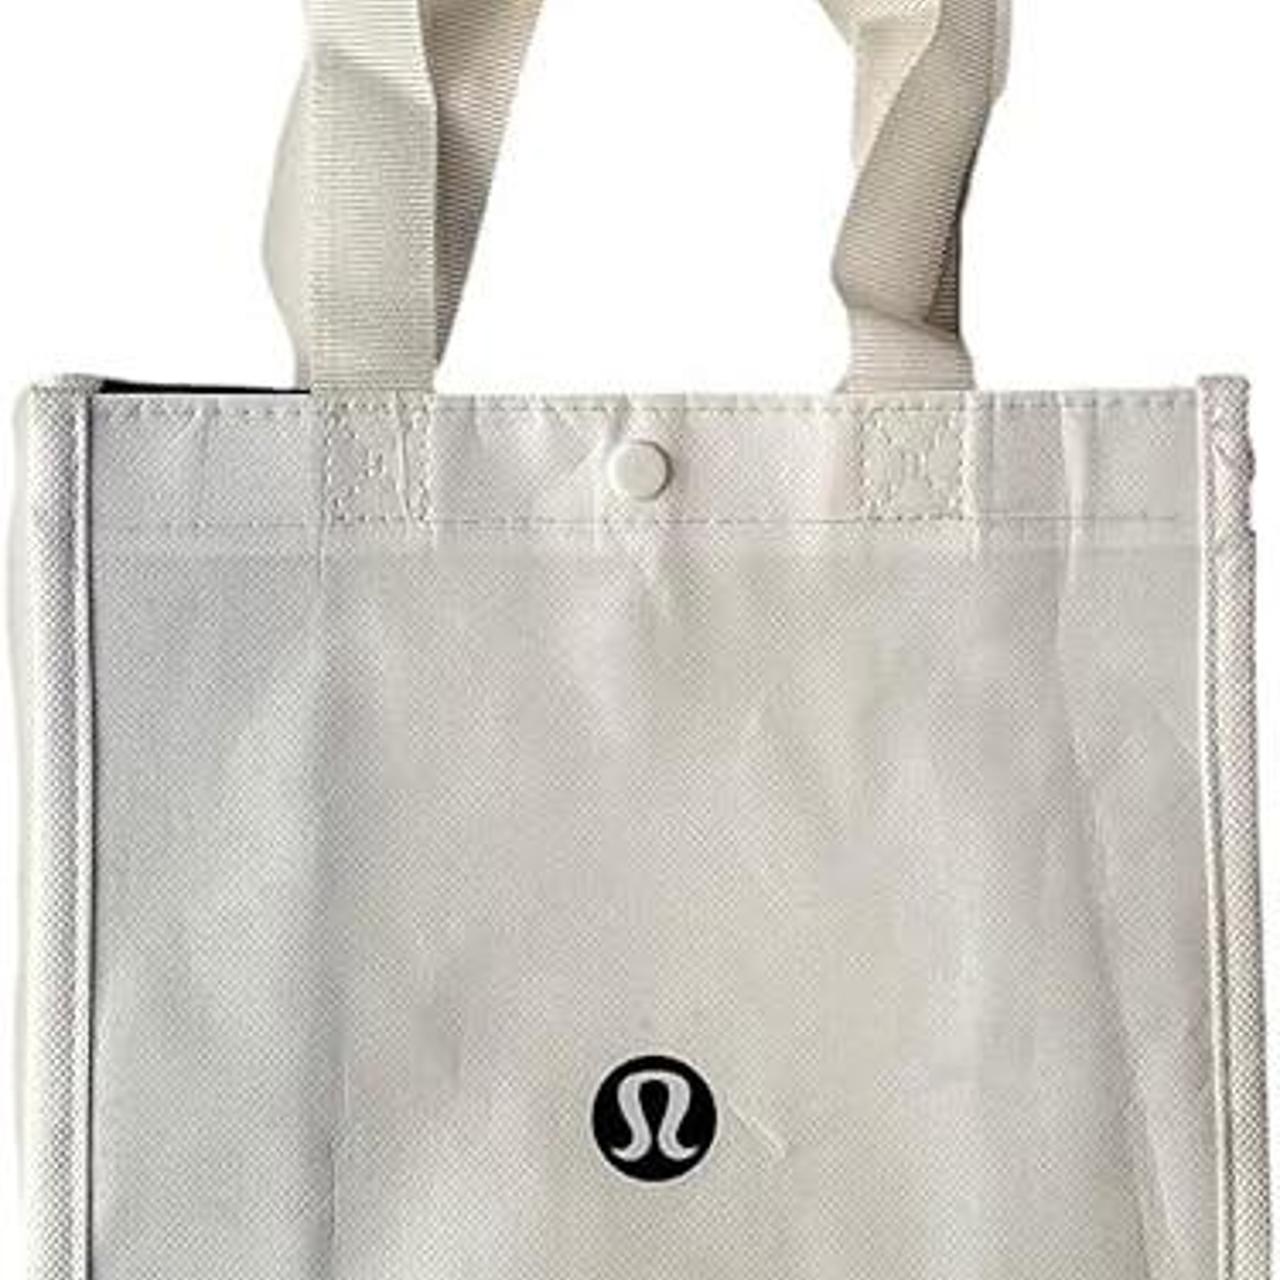 THIS SHOPPING BAG FROM LULULEMON IS BRAND NEW !!! IT - Depop